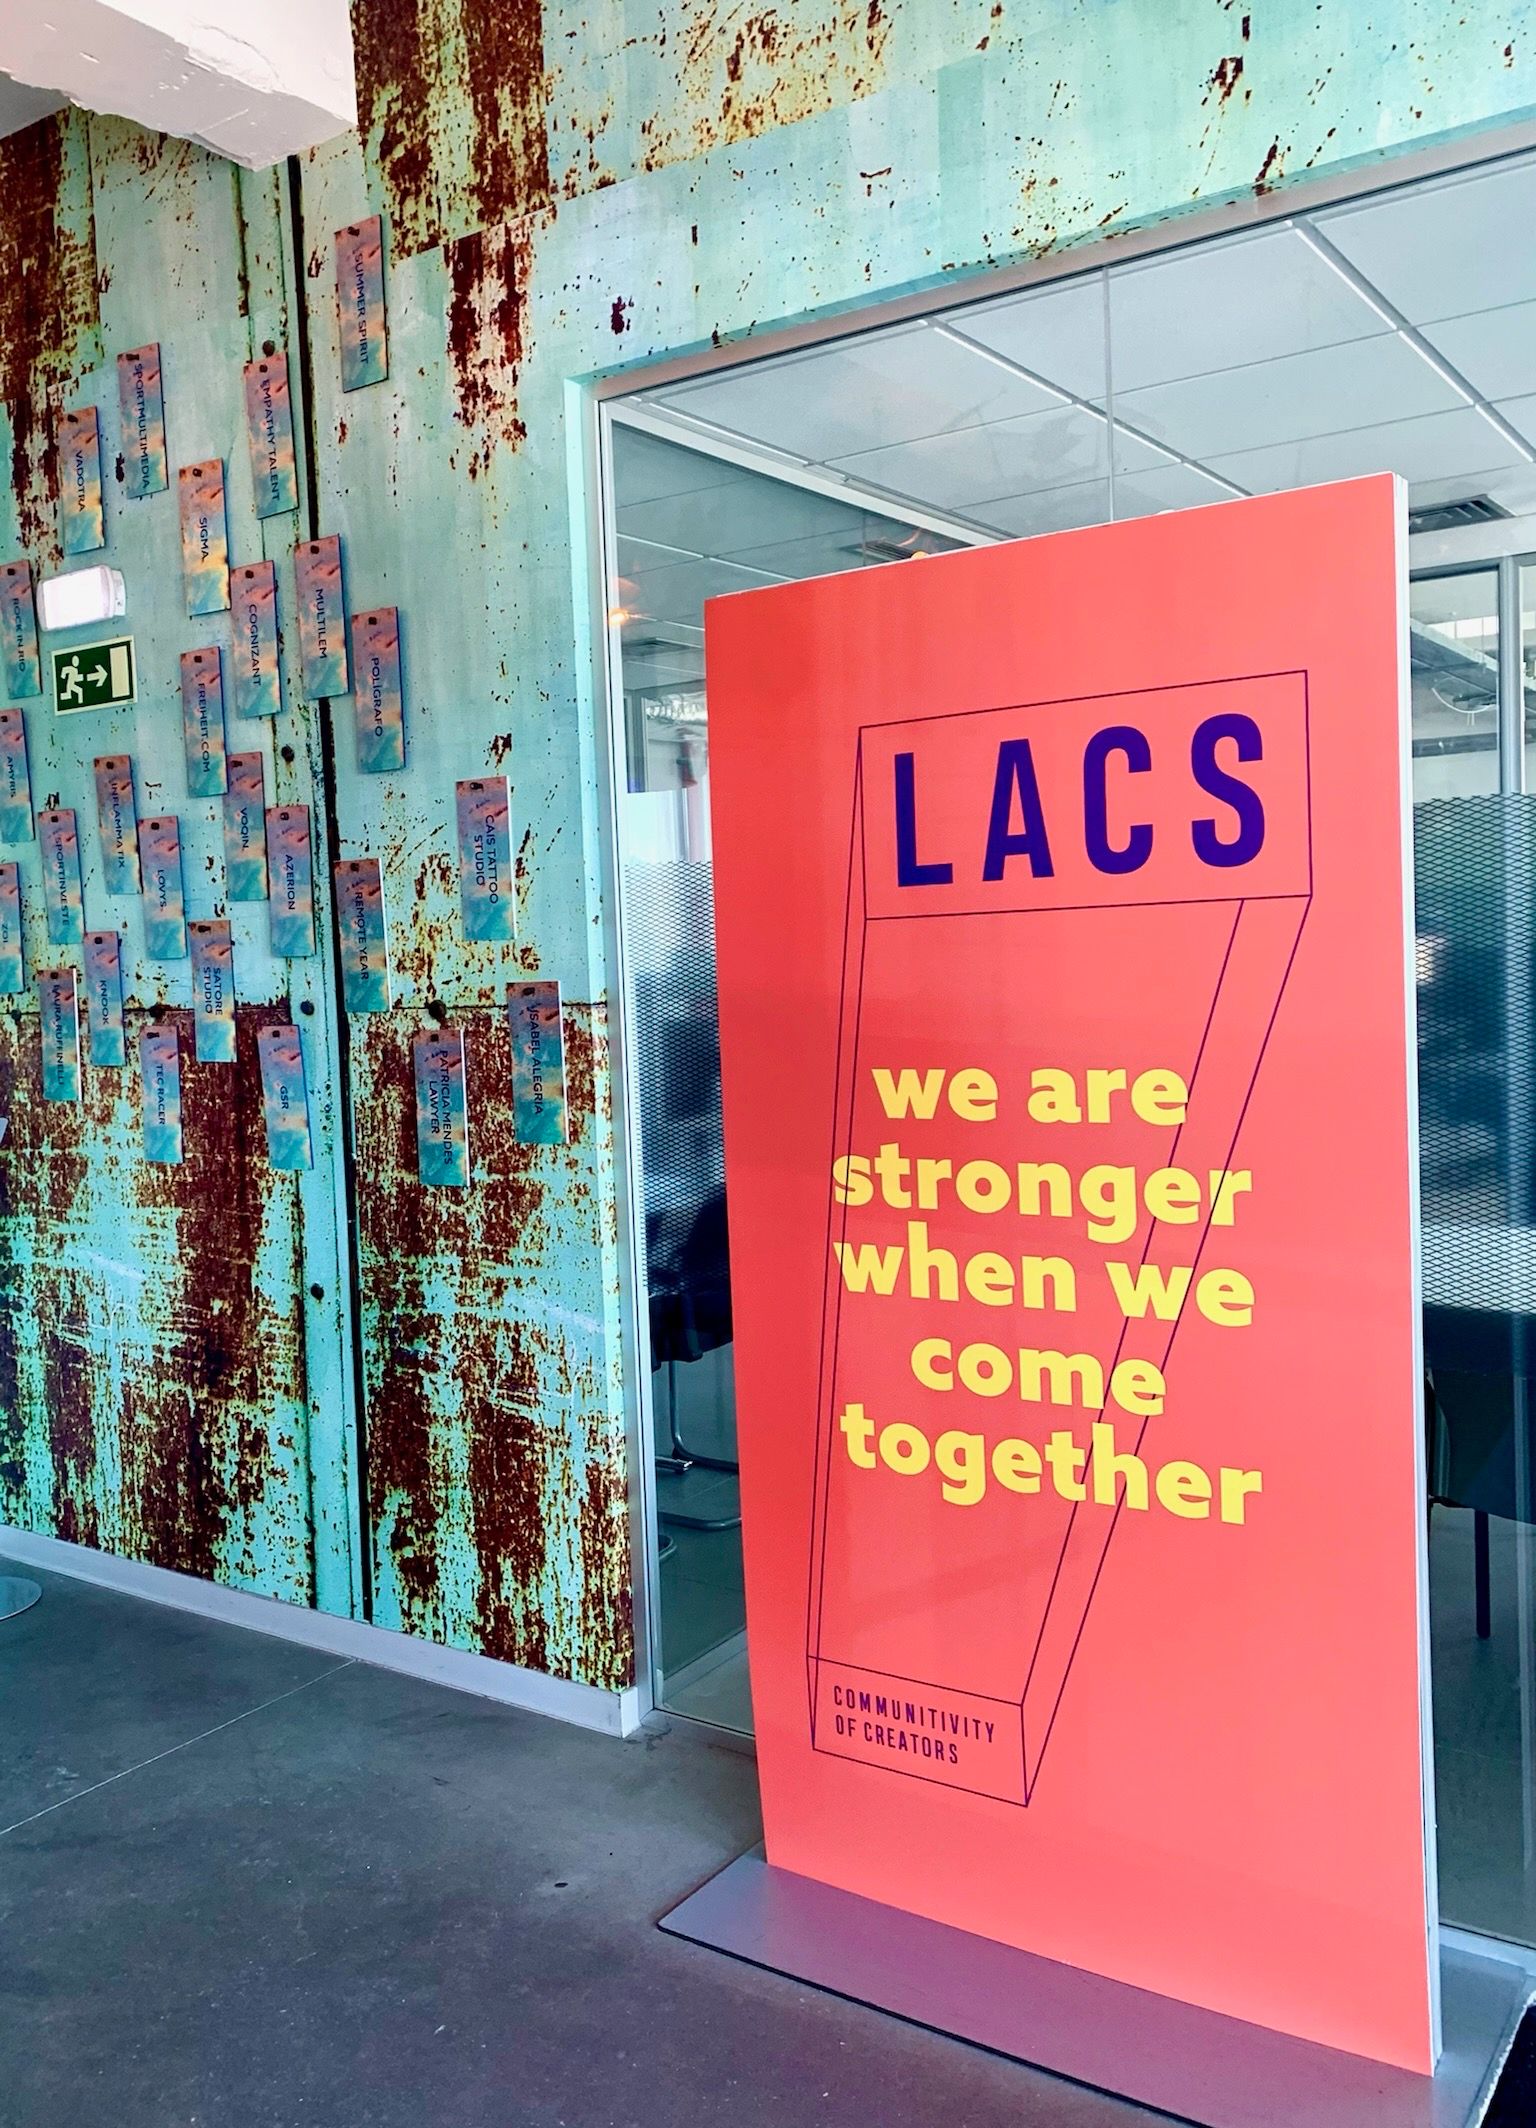 LACS sign in interior Lisbon building "we are stronger when we come together" red and yellow